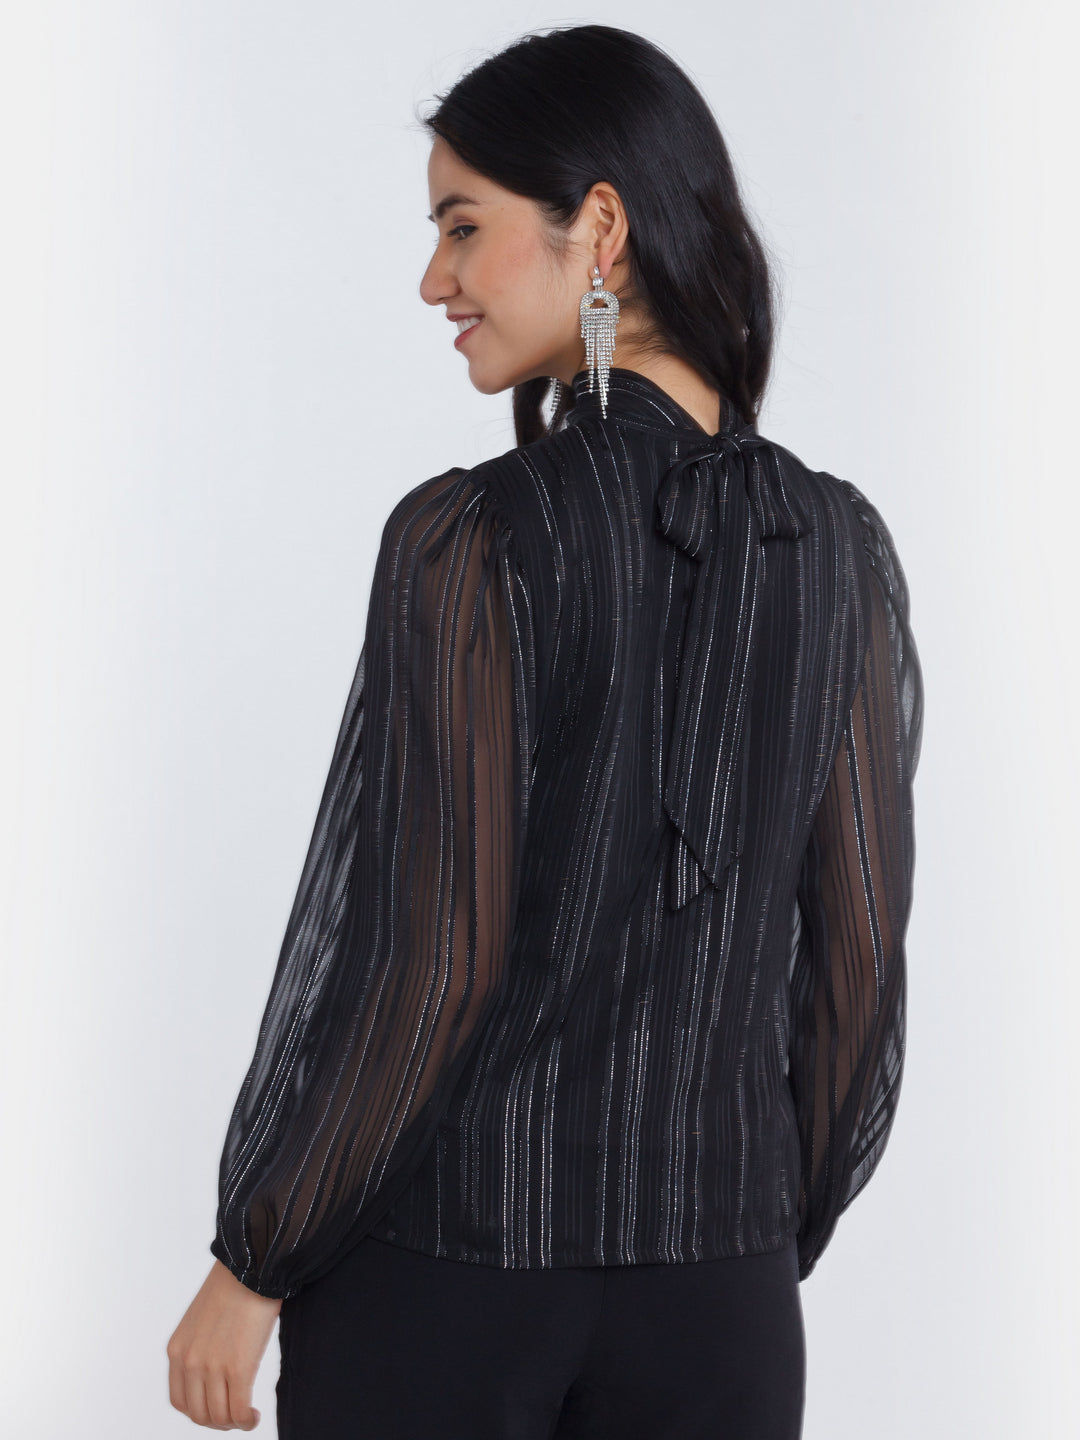 Black Striped Tie-Up Top For Women